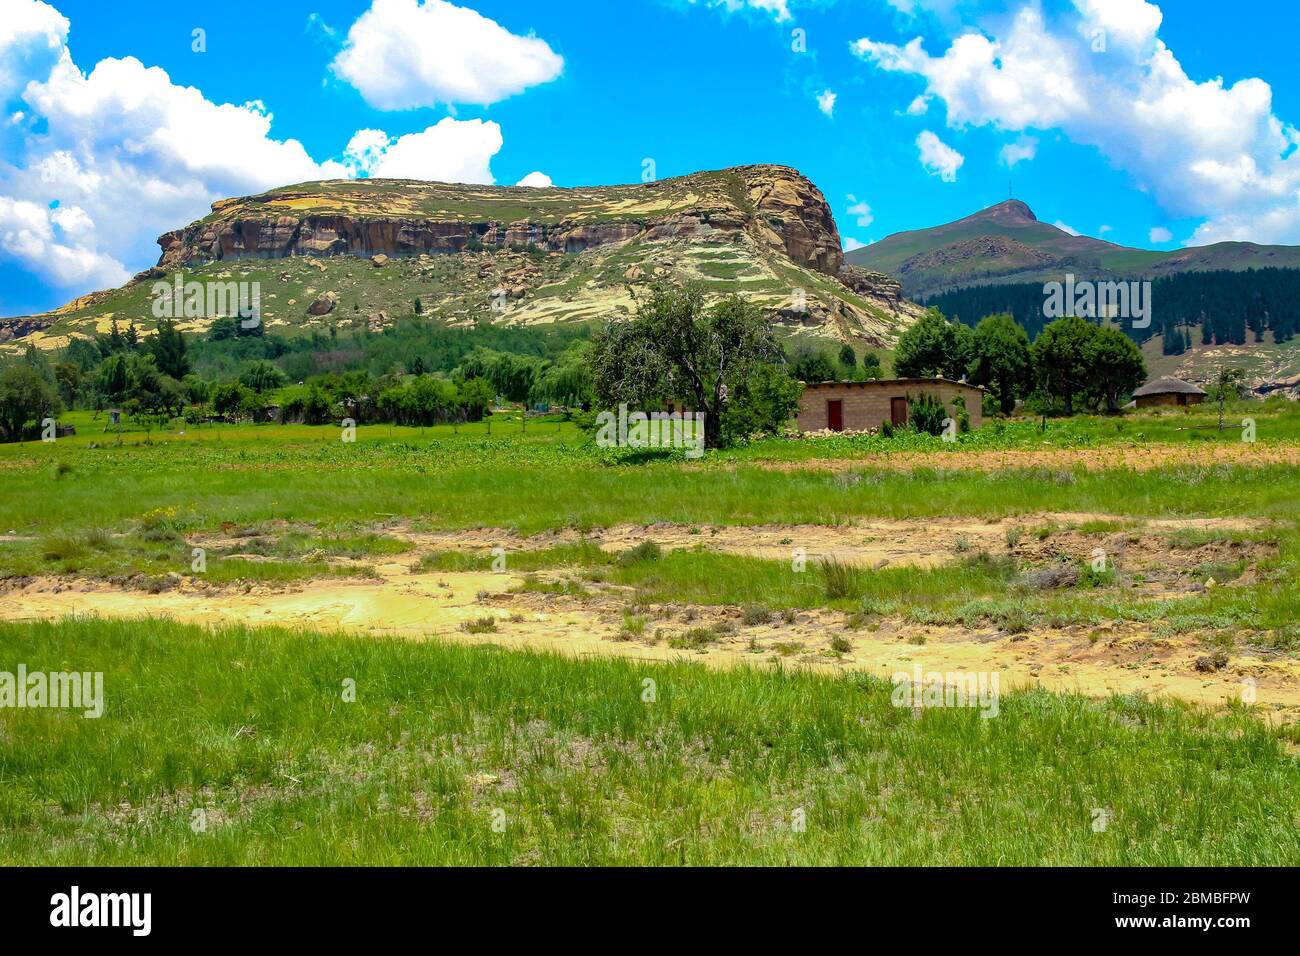 Small village and Drakensberg mountain landscape in Lesotho, Southern Africa. Stock Photo